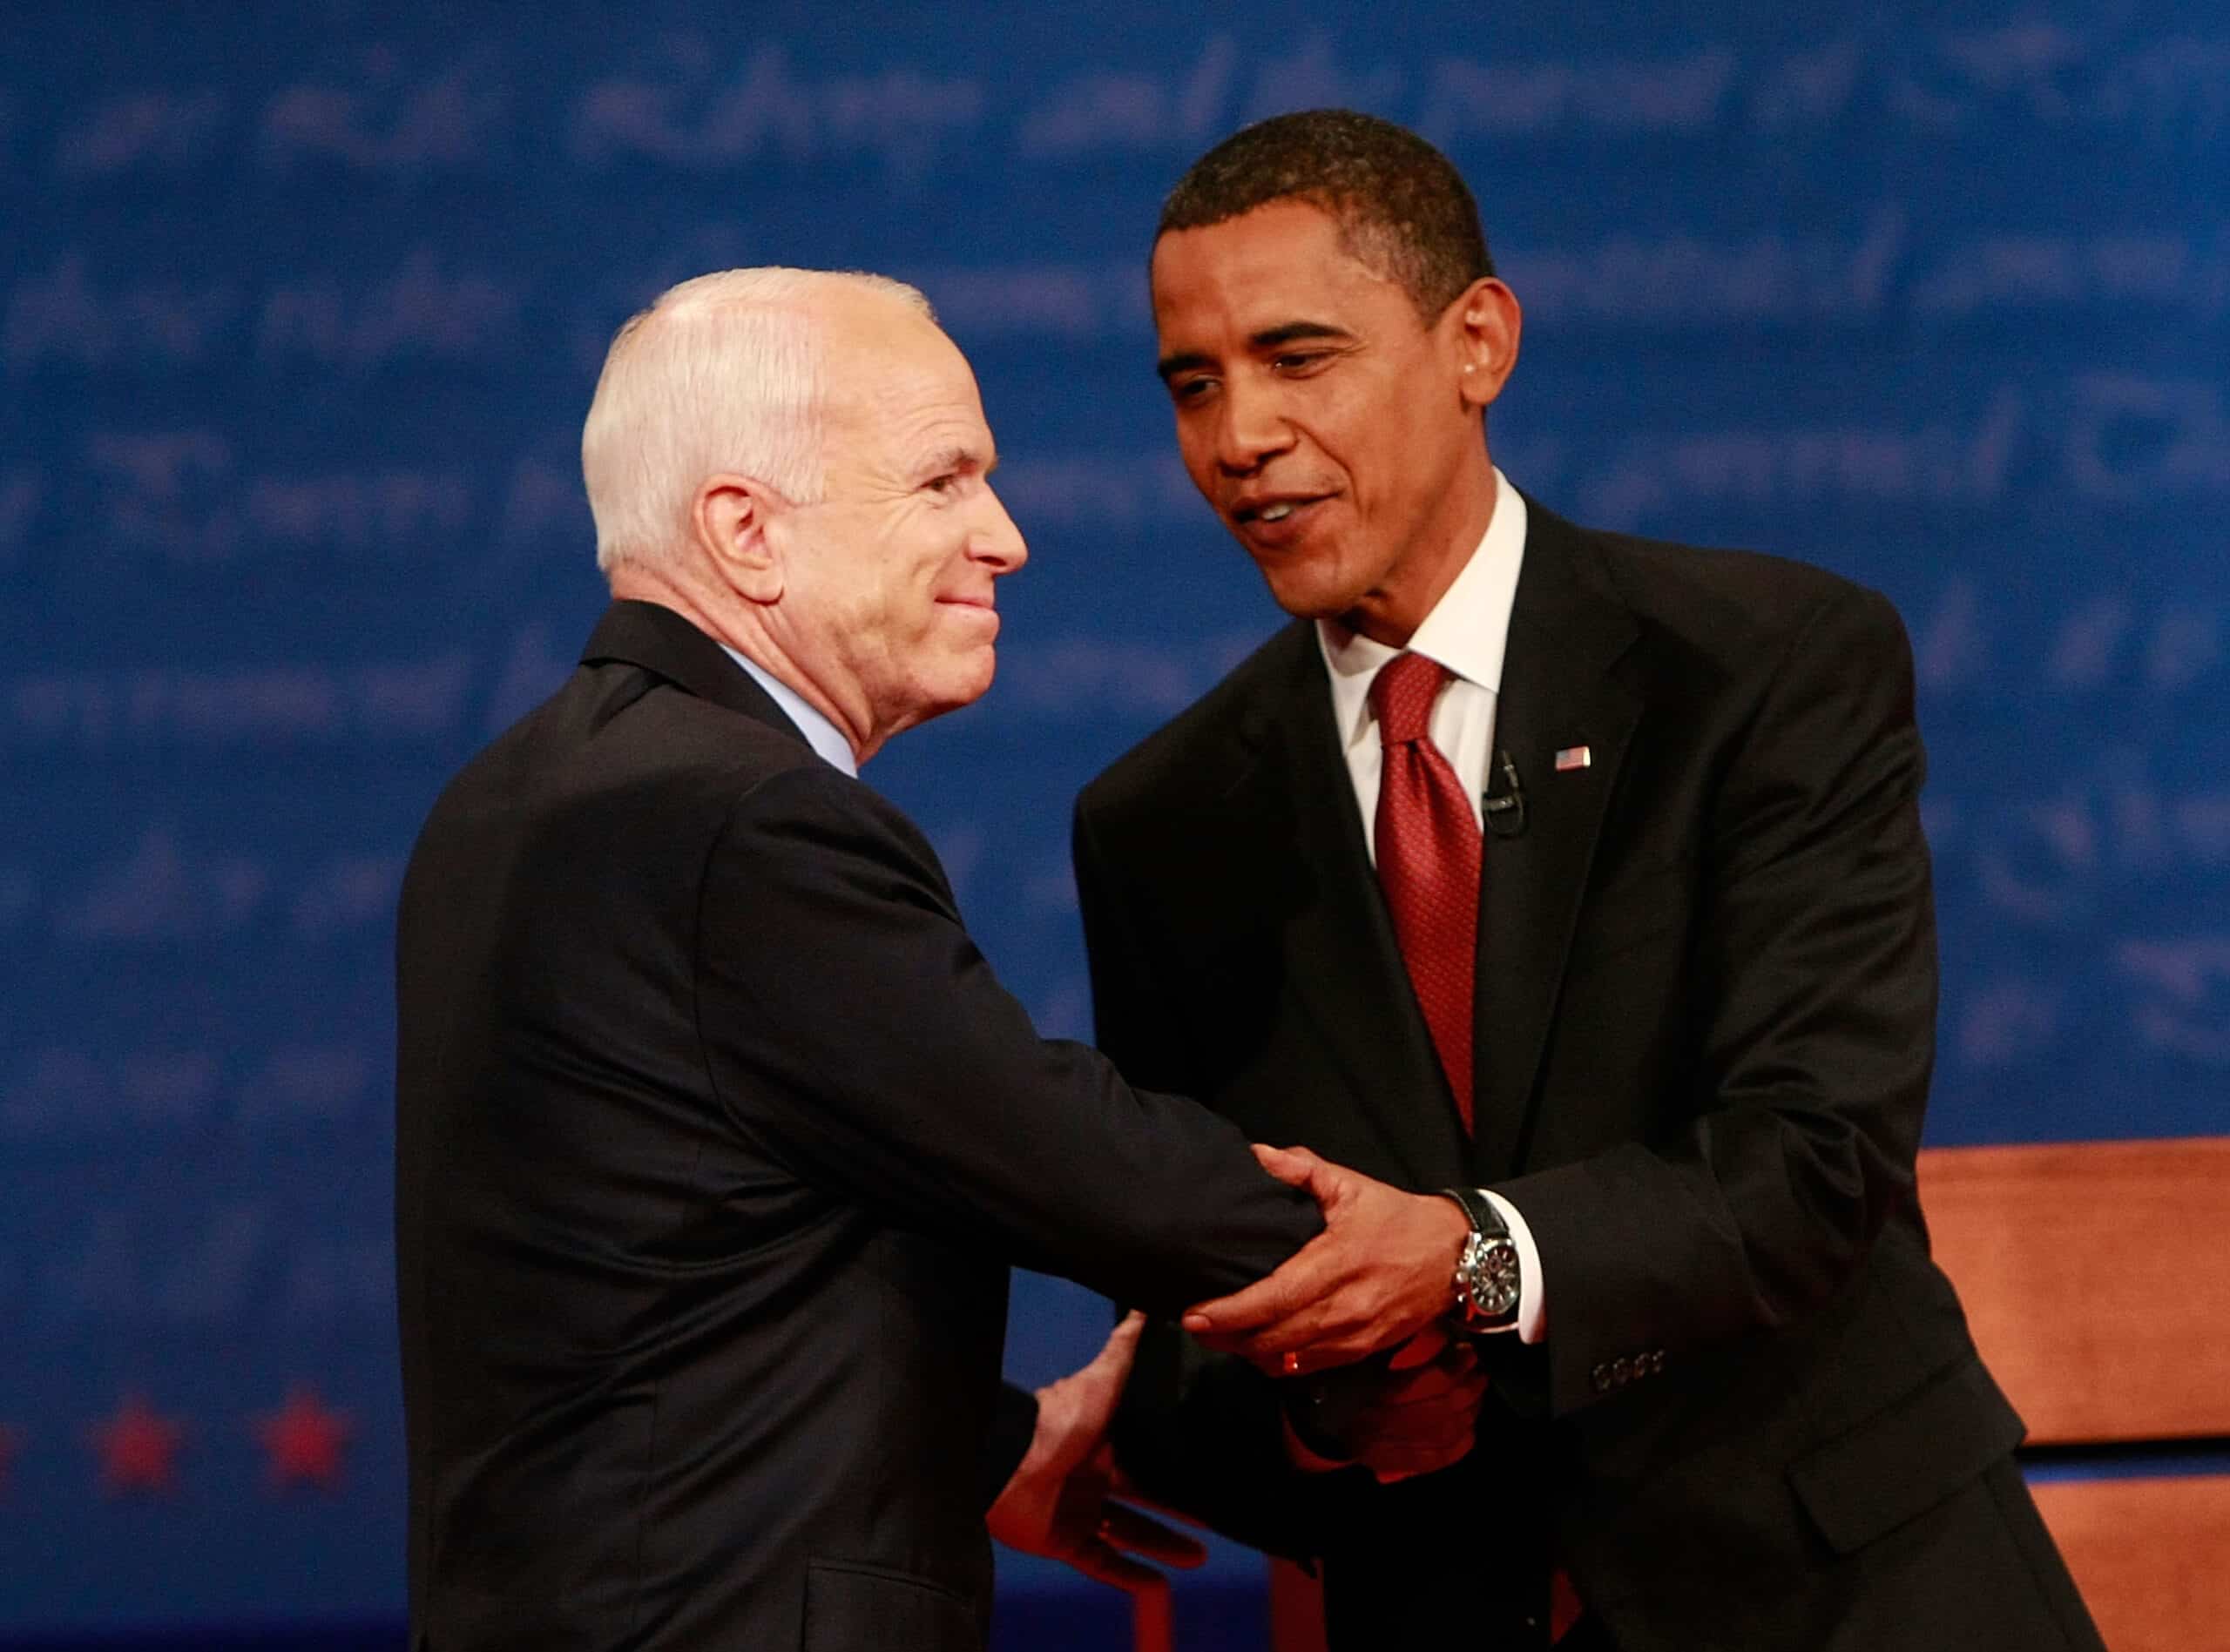 McCain And Obama Square Off In First Presidential Debate